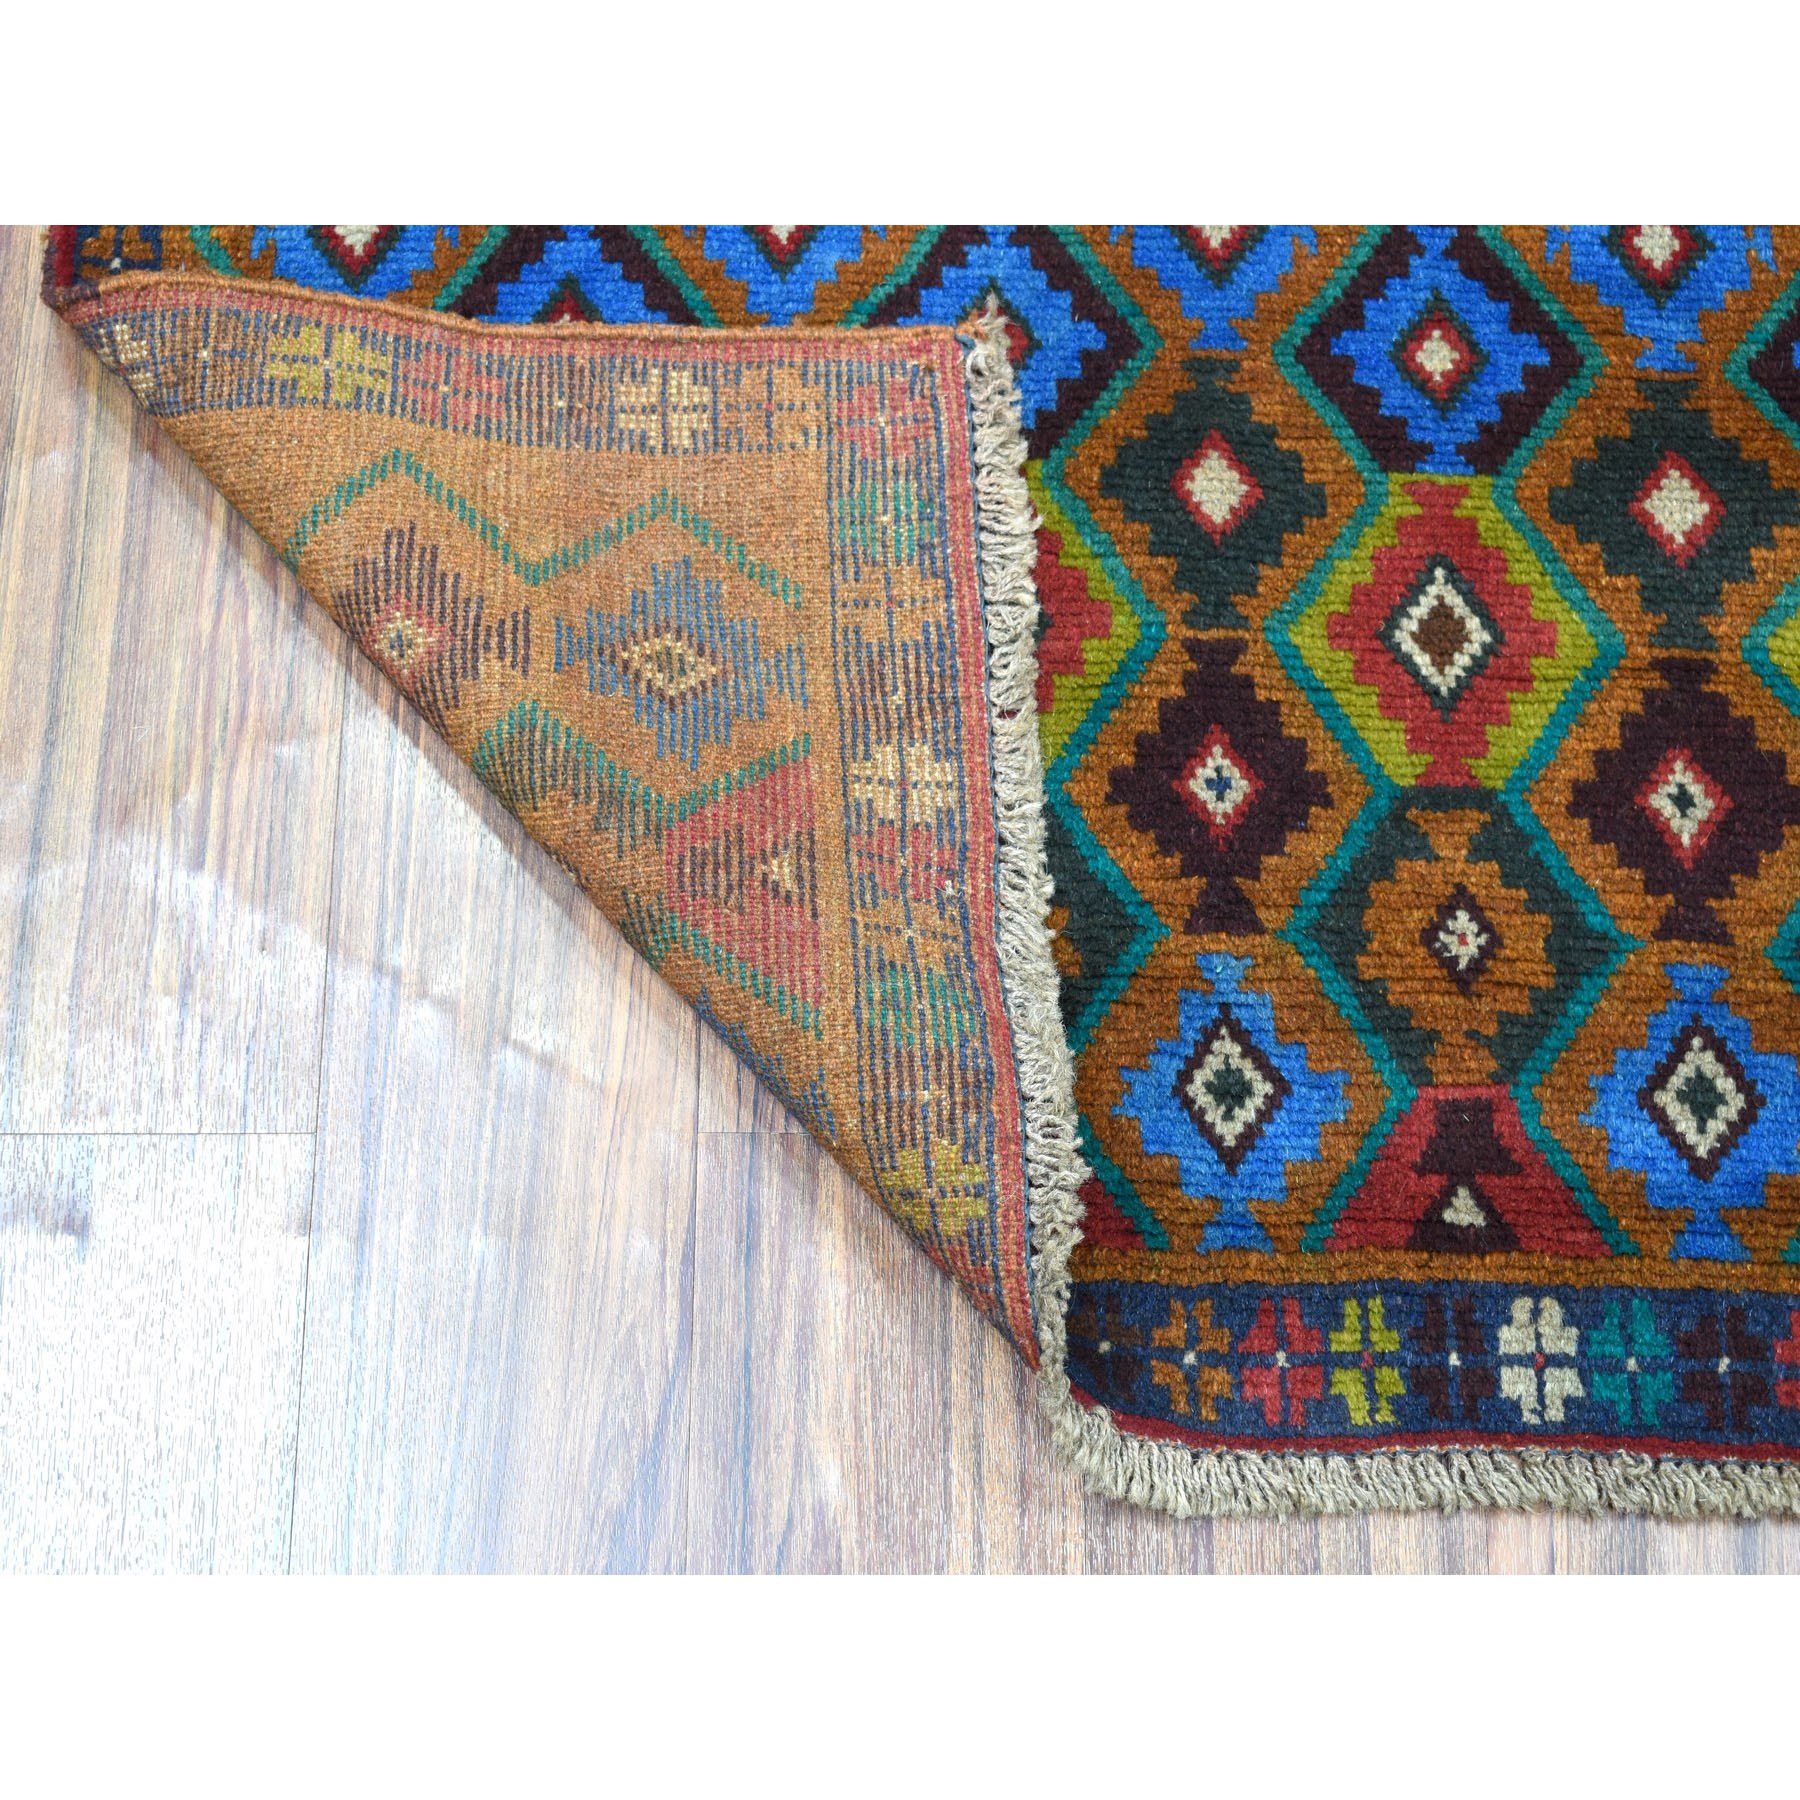 3'5"x4'5" Brown Tribal Design Colorful Afghan Baluch Hand Woven Pure Wool Oriental Rug 